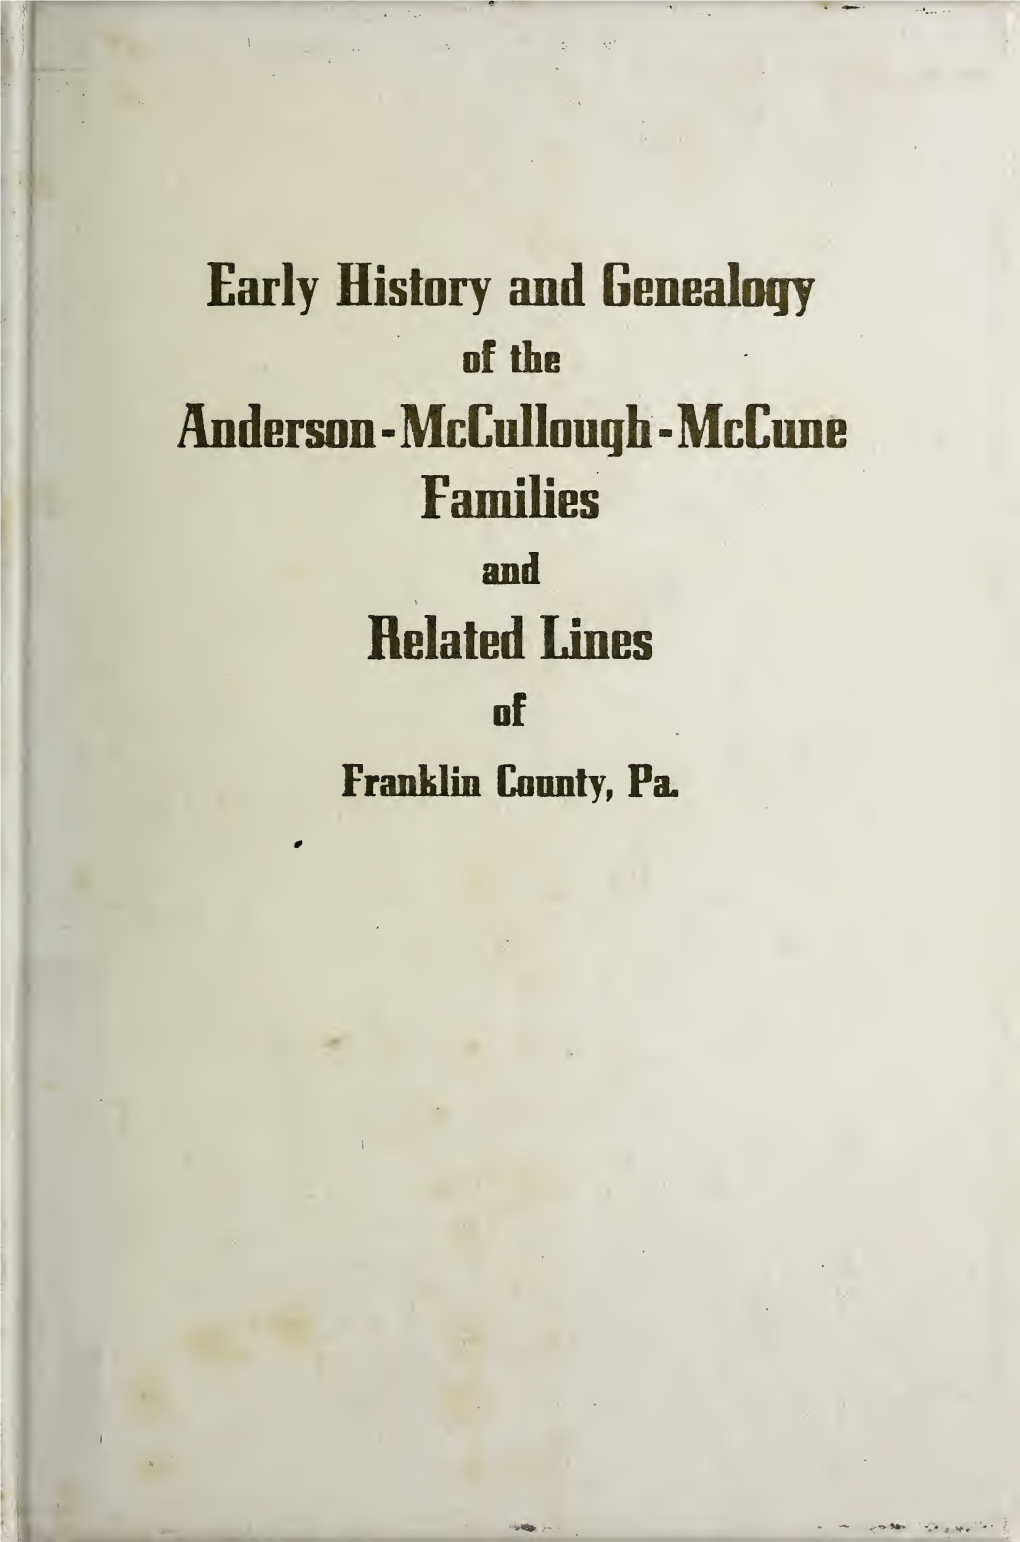 Early History and Genealogy of the Anderson-Mccullough-Mccune Families and Related Lines of Franklin County, Pa. / Elizabeth